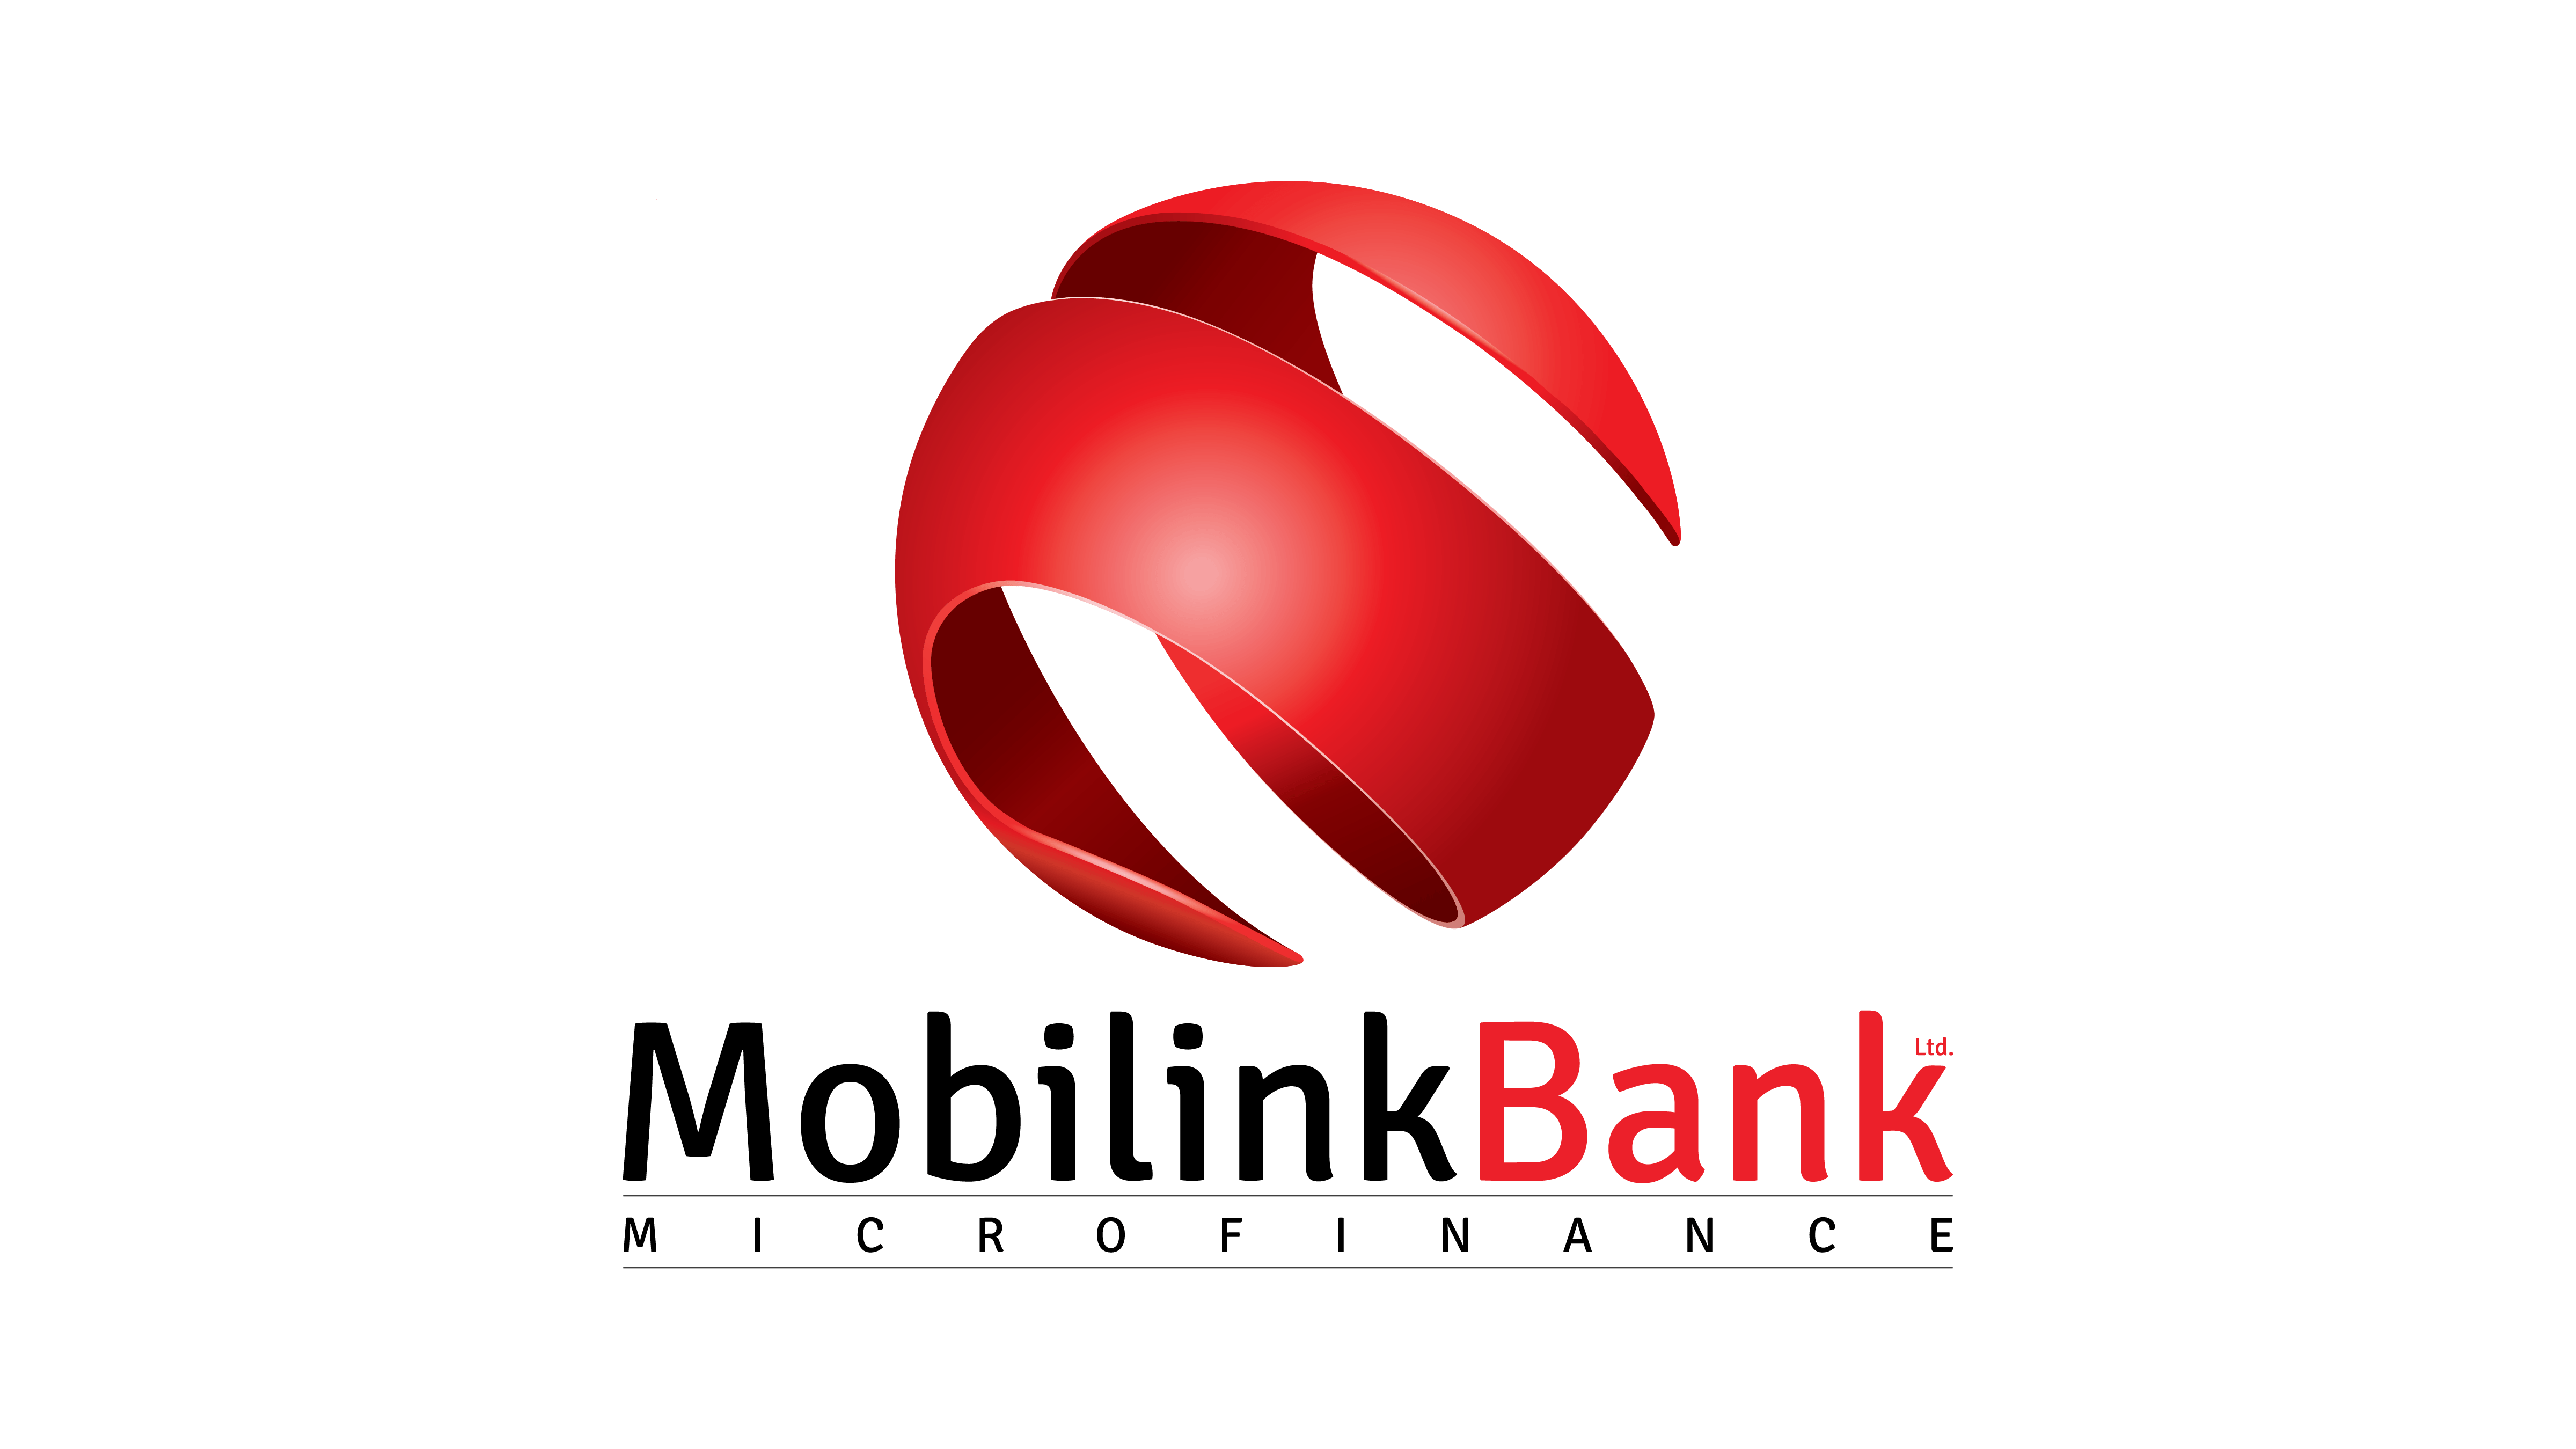 With a revenue of PKR 41,053 million Mobilink Bank witnesses 72% revenue growth, championing inclusive banking for women and SMEs